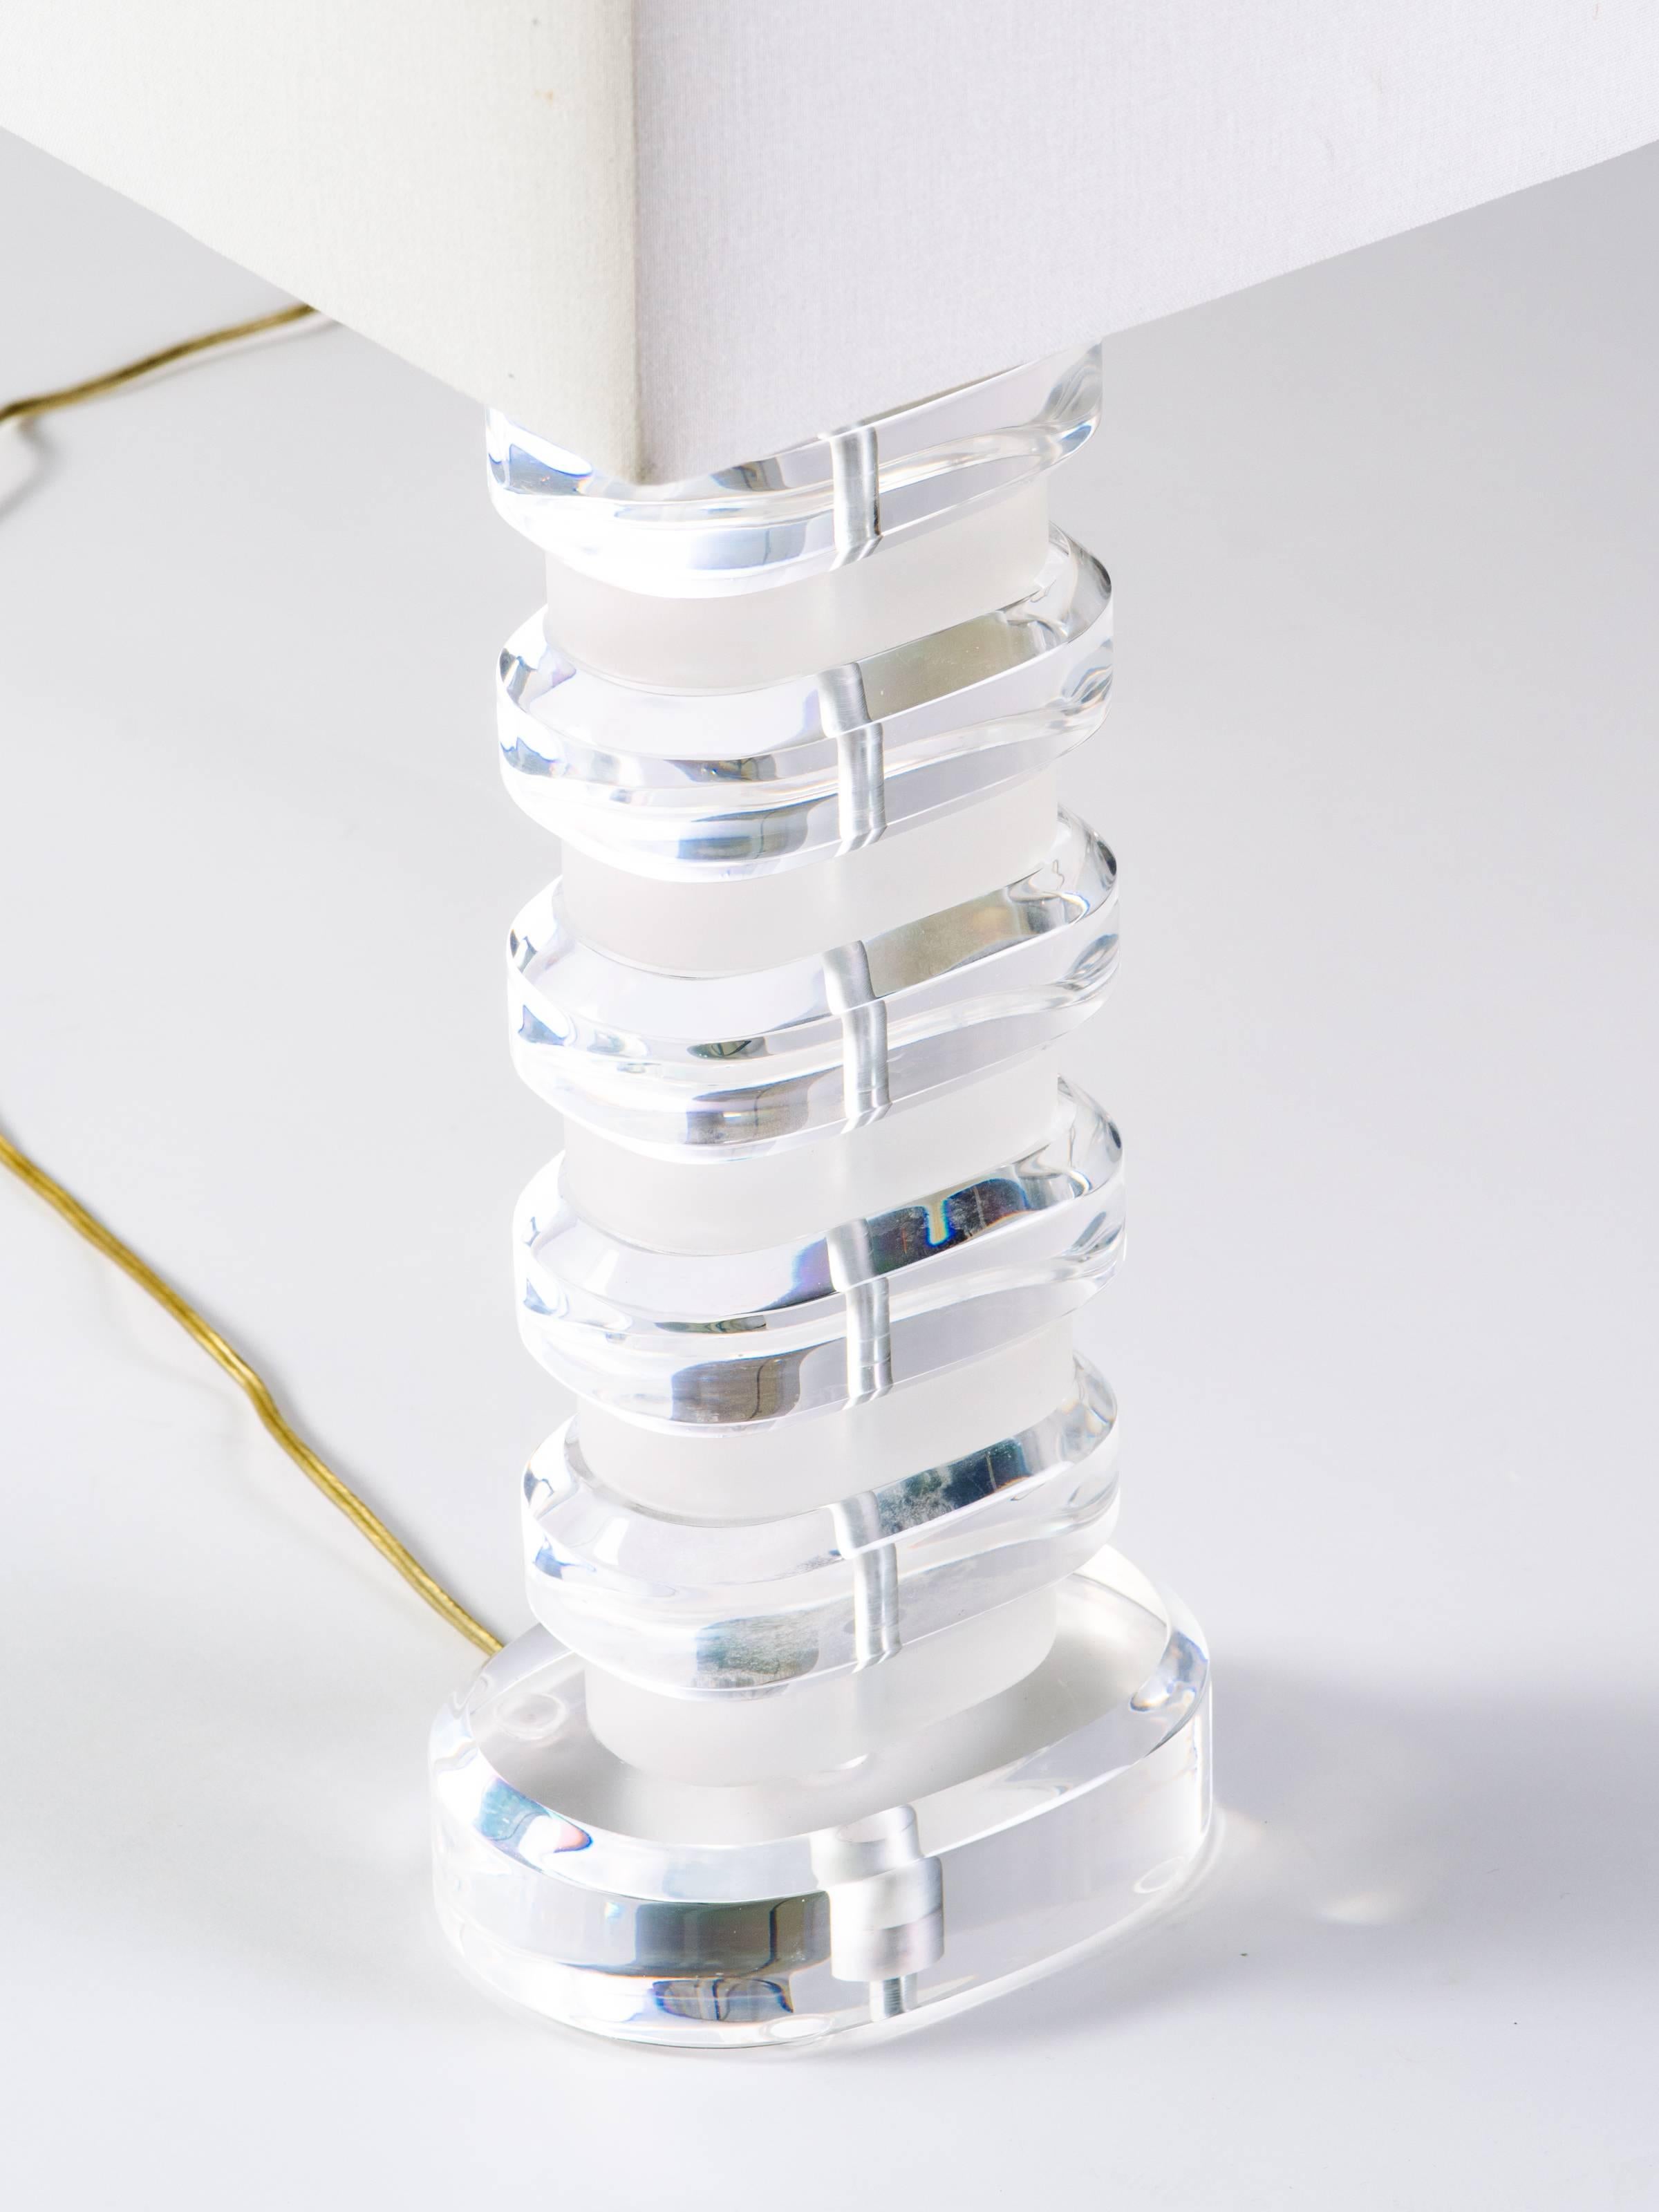 Very chunky Lucite lamp. Features stacked solid Lucite blocks, both clear and frosted with polished edges and oval forms. Has original diamond shaped Lucite finial.